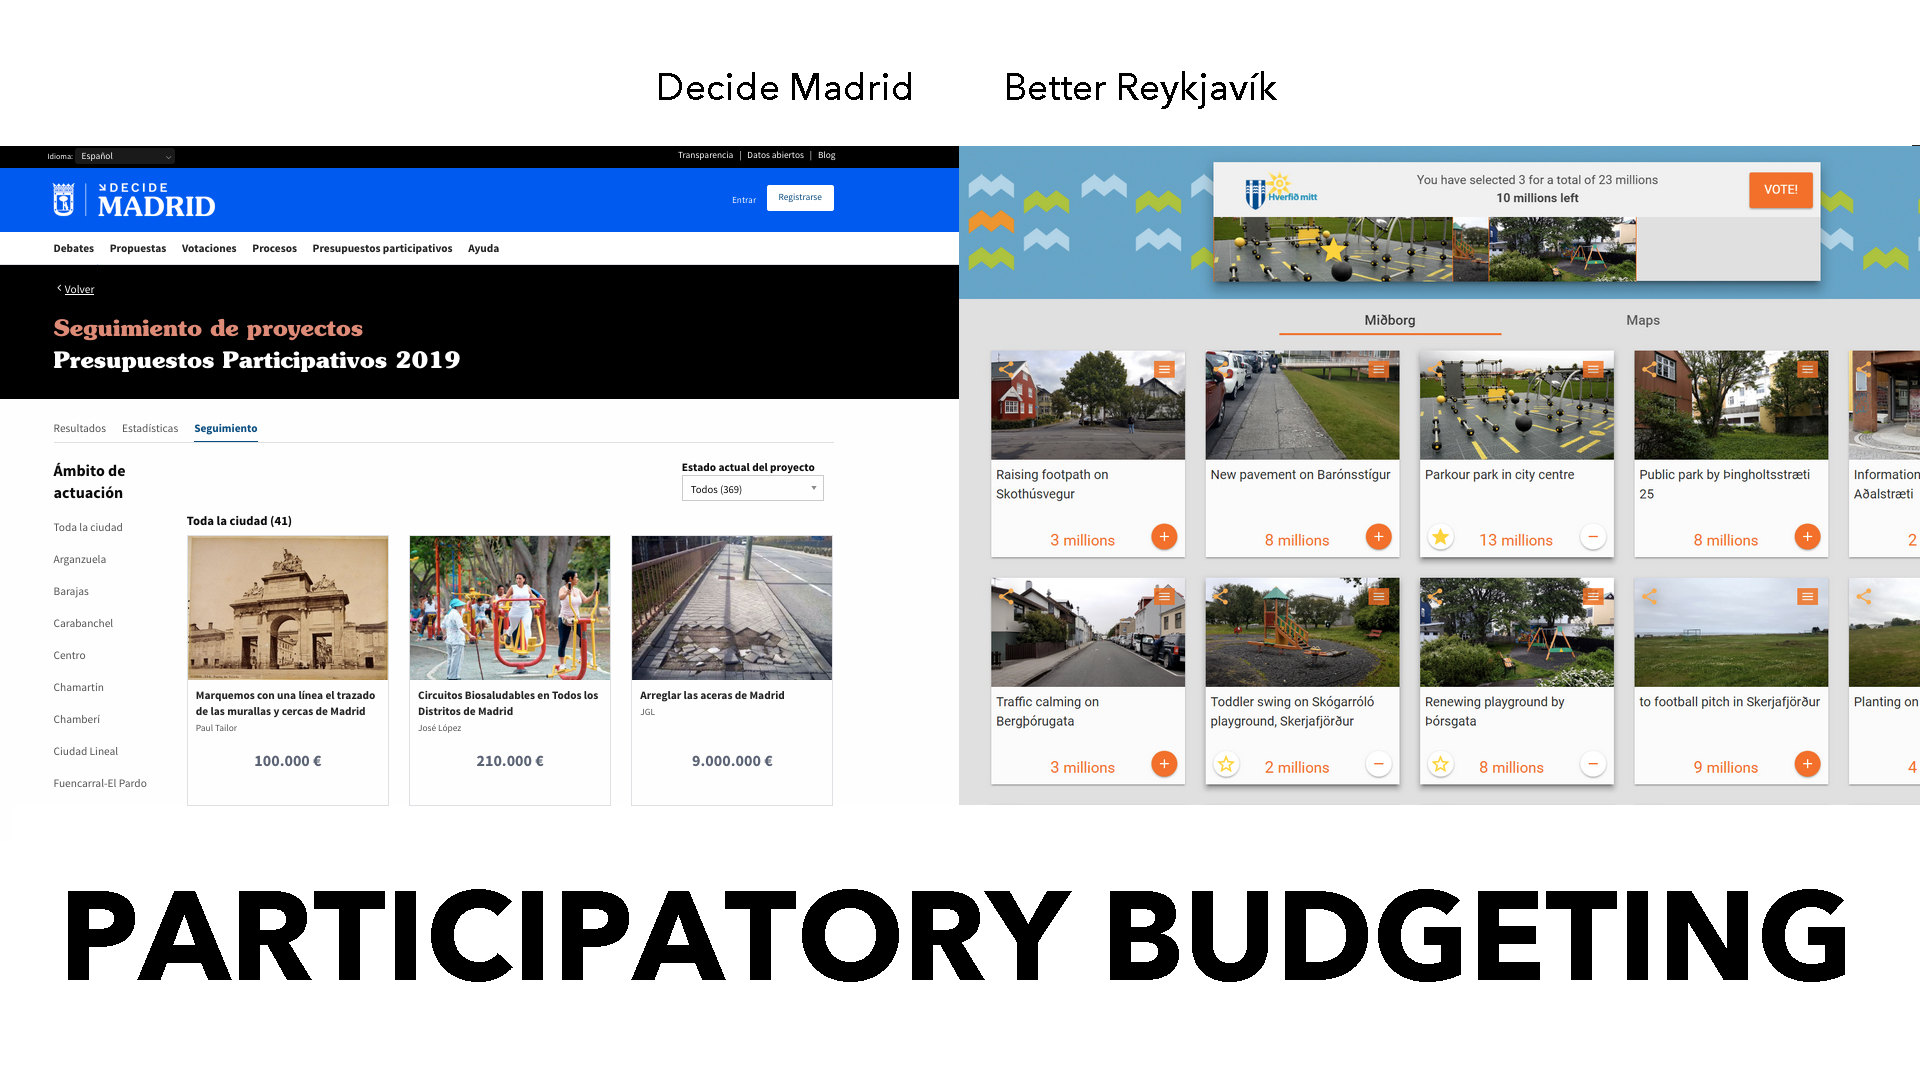 Participatory budgetting on Decide Madrid and Better Reykjavik